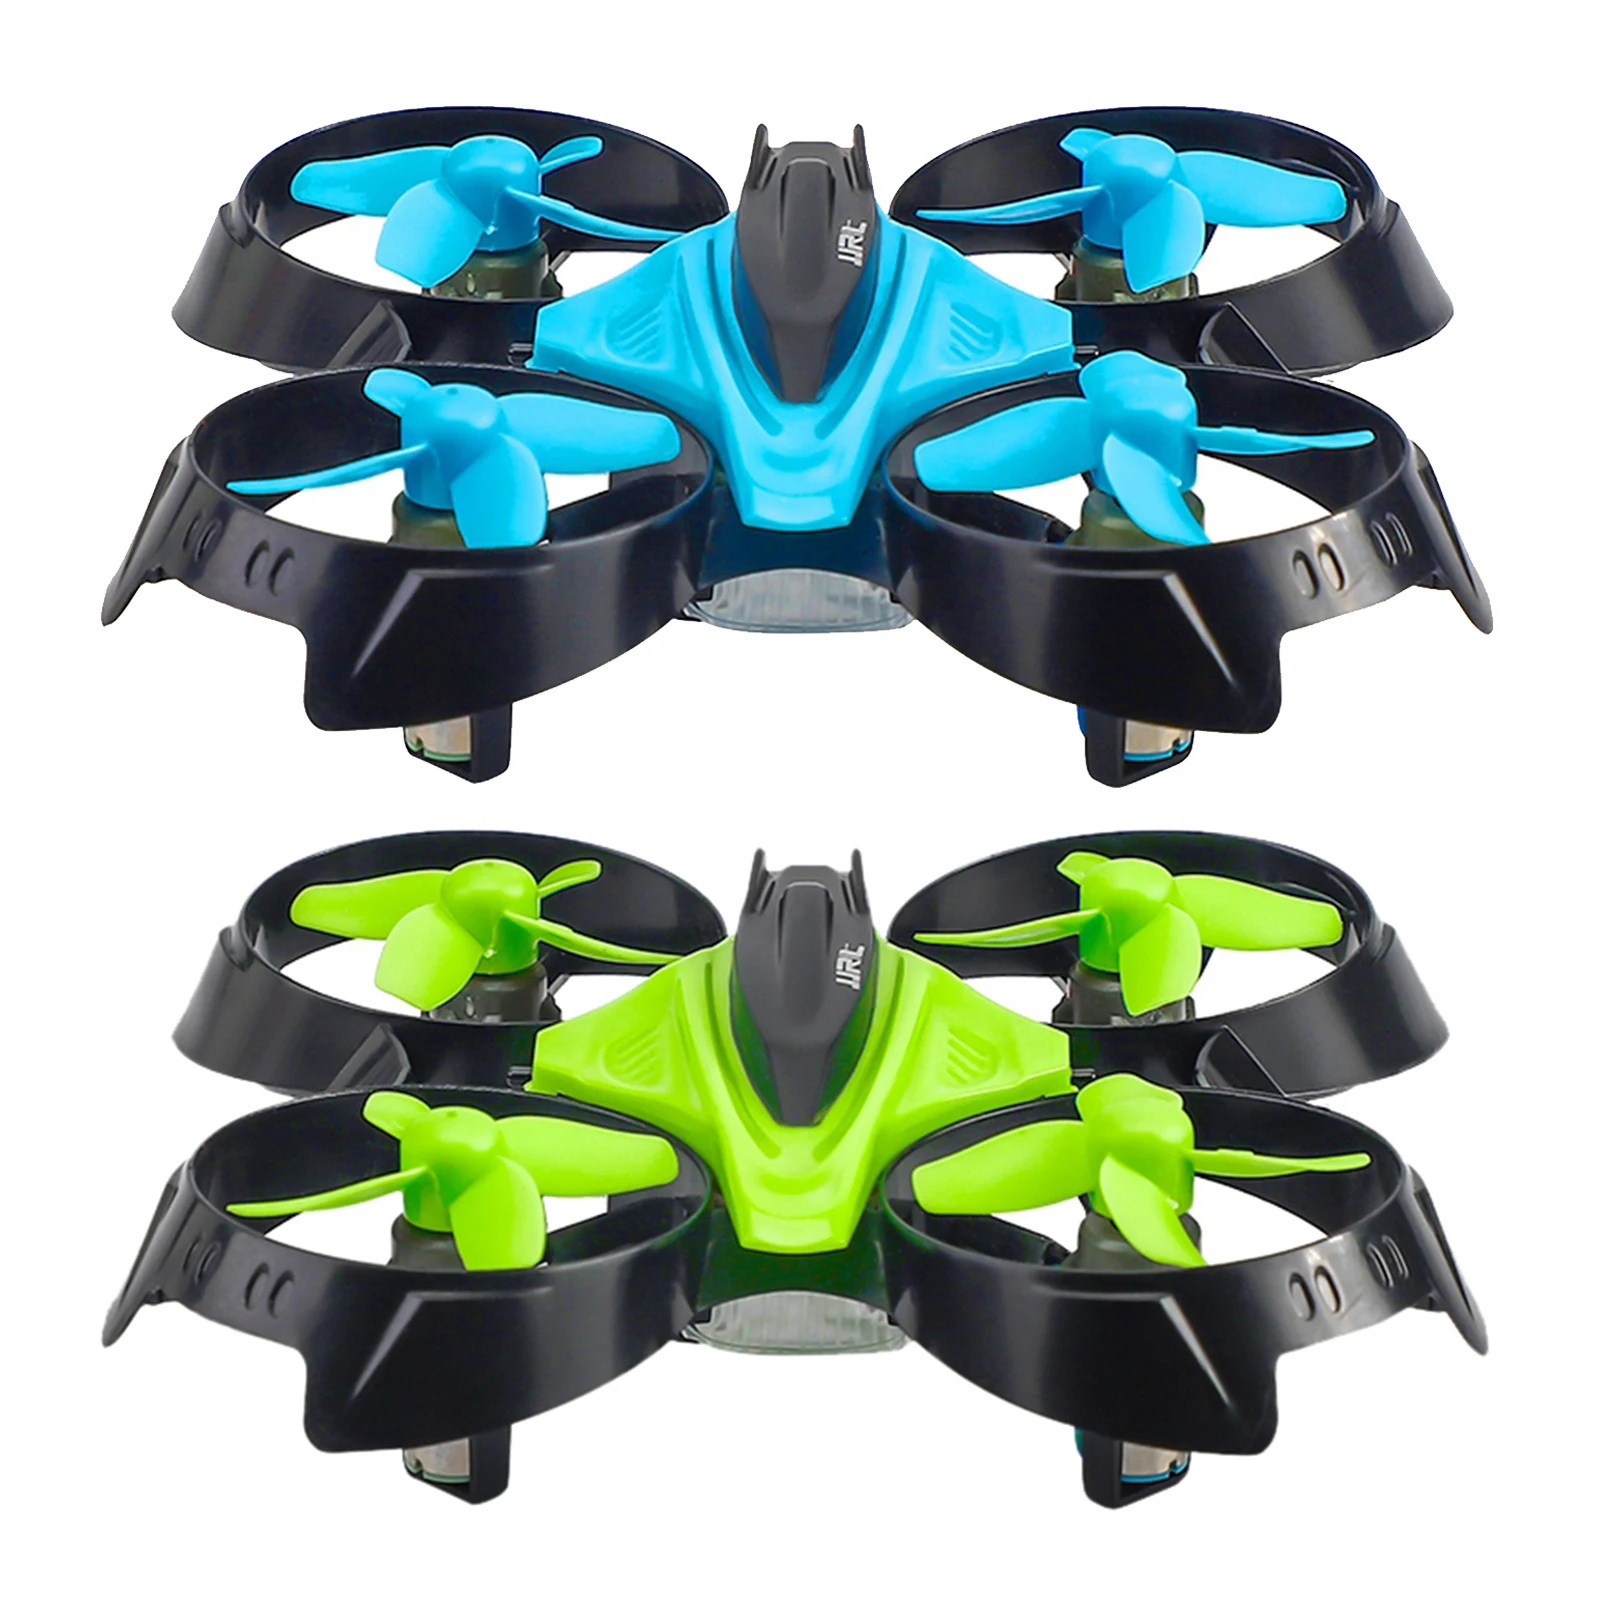 Mini Drone One Key Take off/Land Altitude Hol 3D Flip Mini Drone RC Helicopter Quadrocopter For Kids